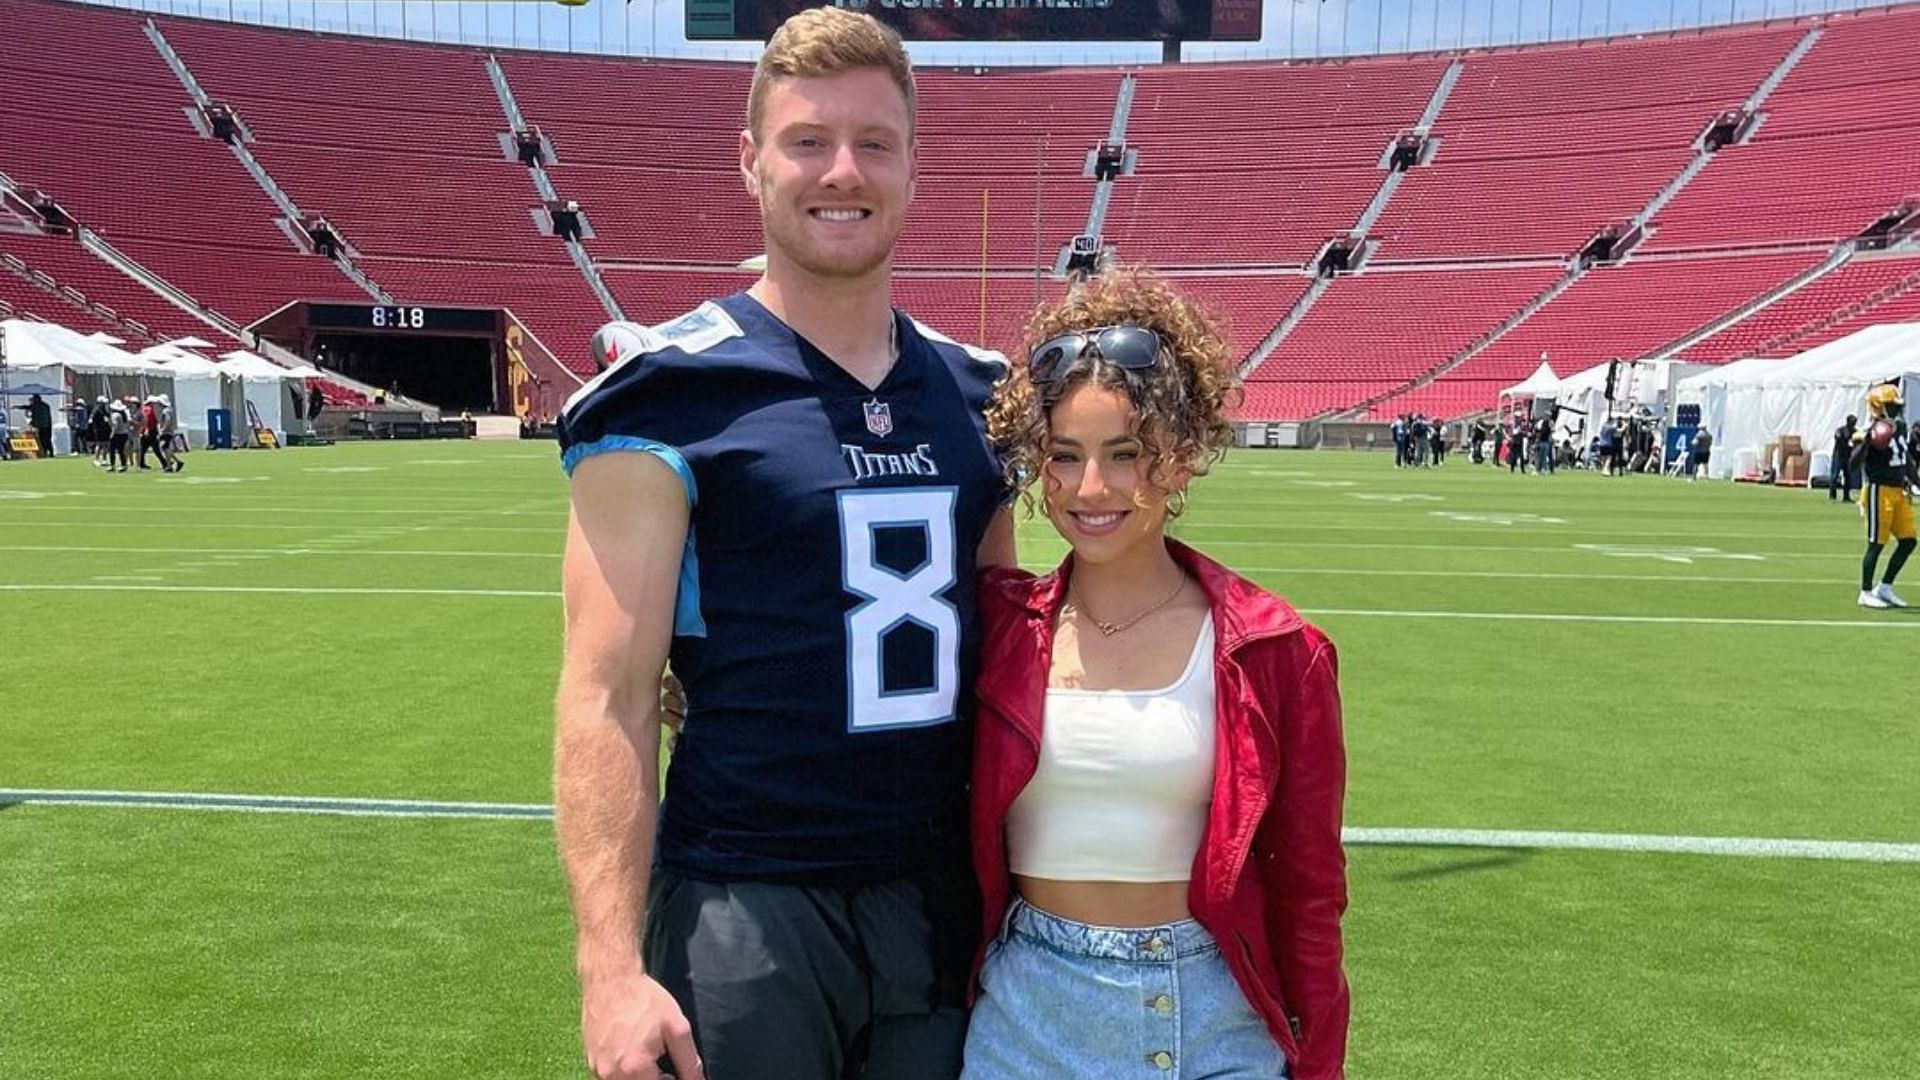 Will Levis and Gia Duddy pose for a photo at the Los Angeles Coliseum during the NFLPA Rookie Premiere. (Image credit: Gia Duddy on Instagram)